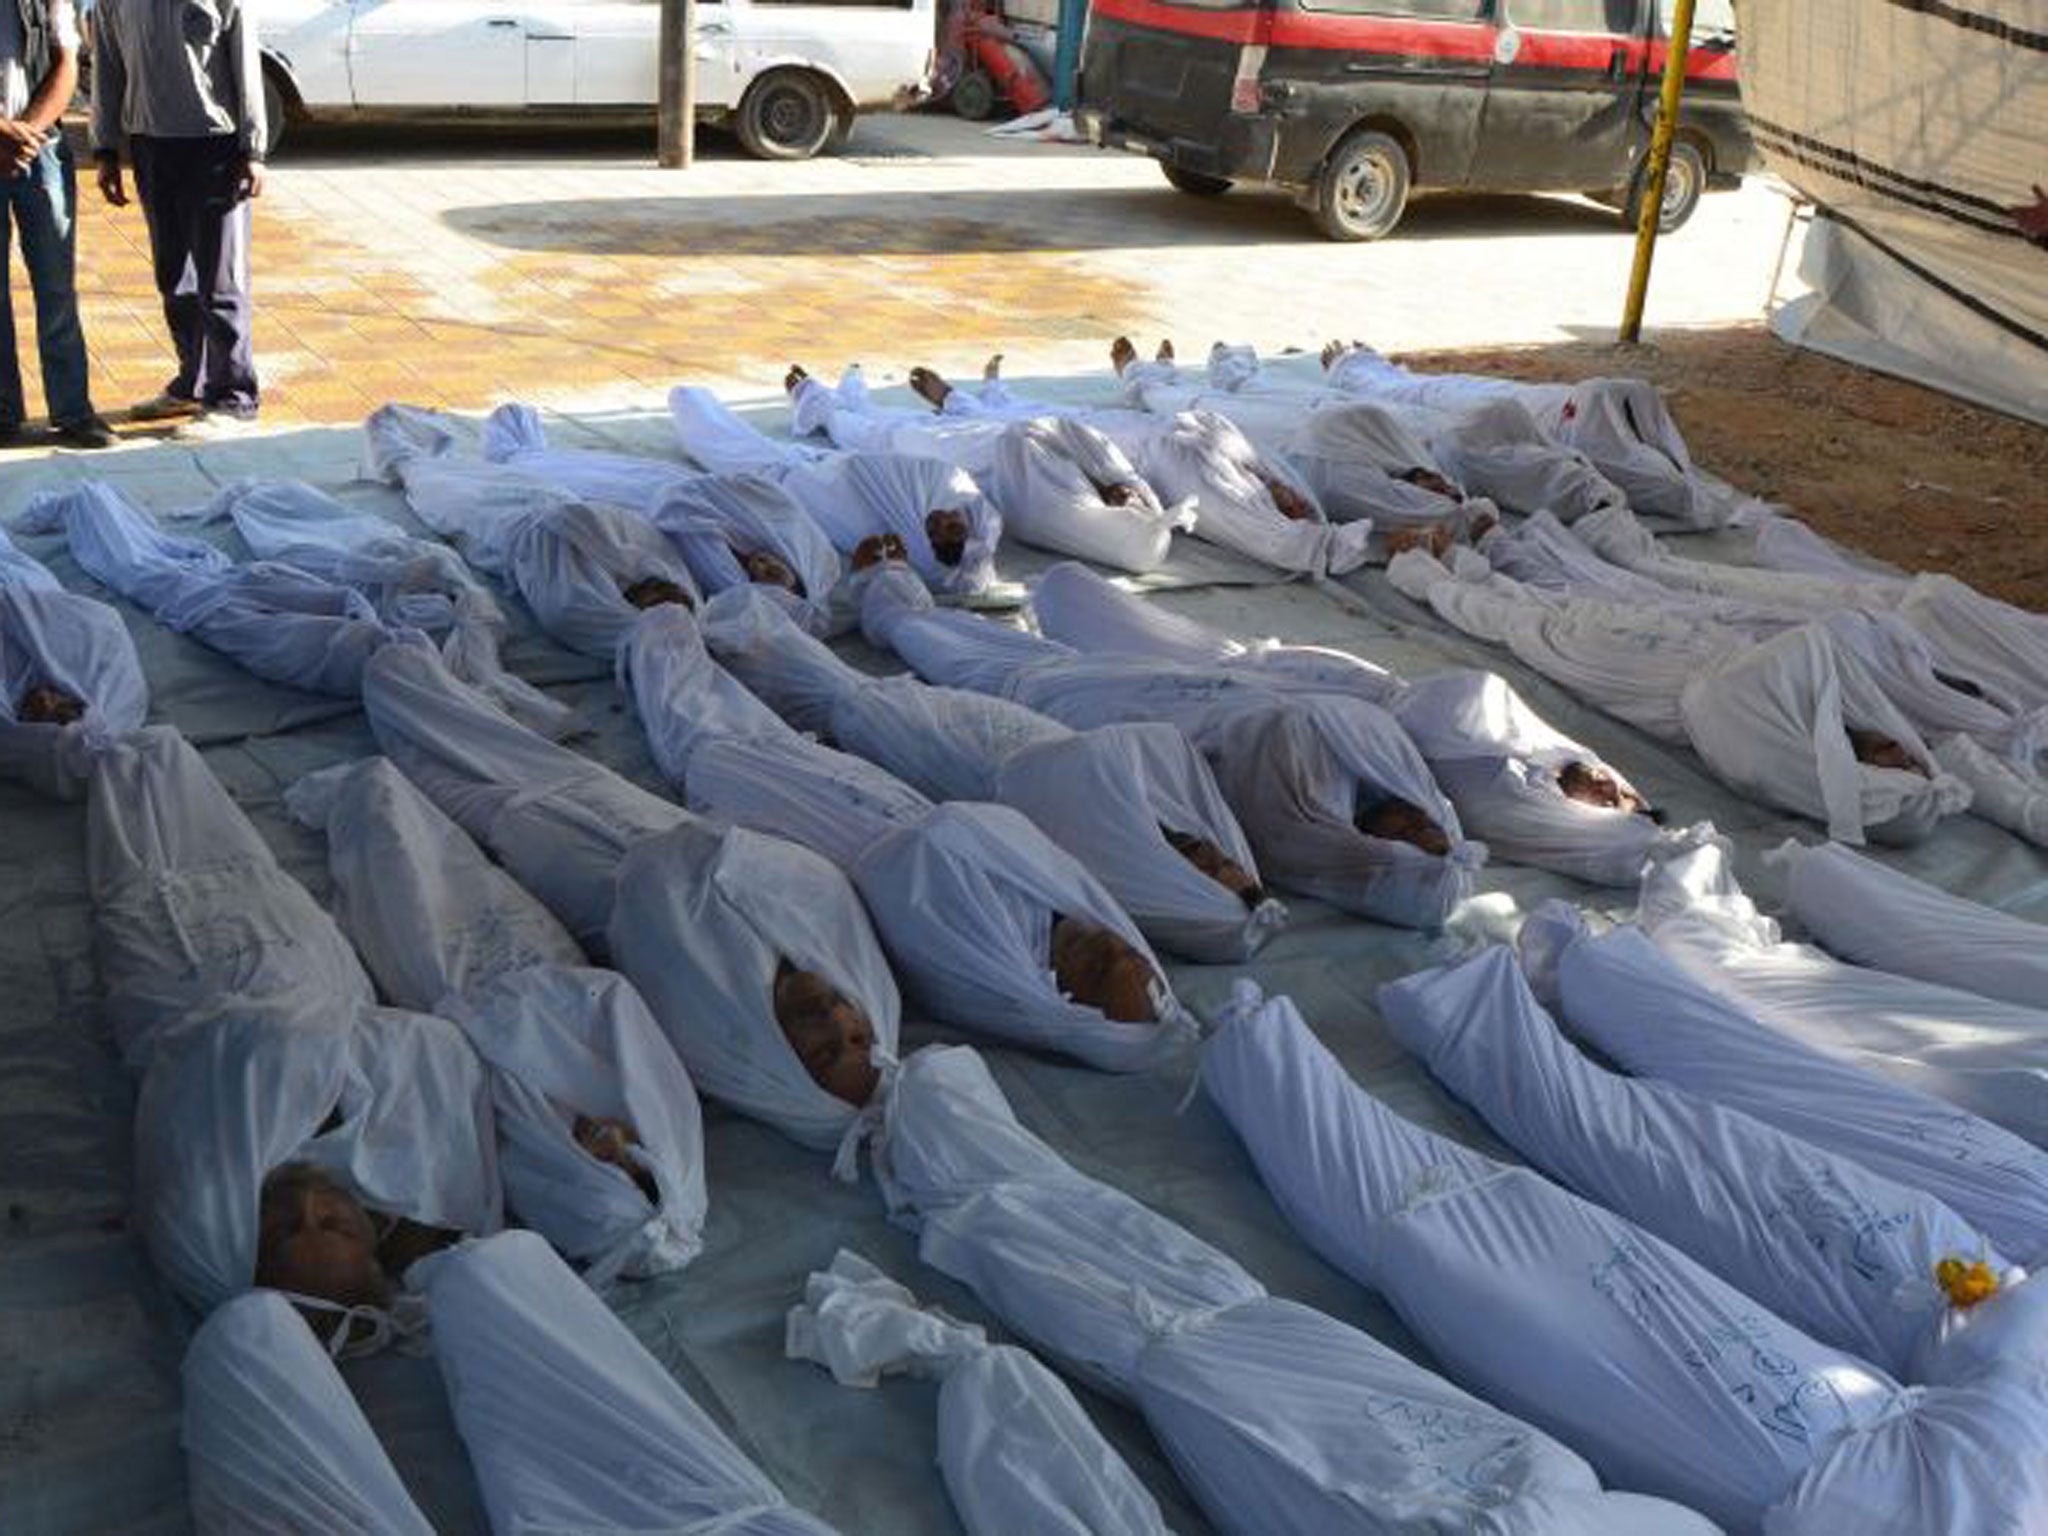 Victims of the Ghouta attack lie in a makeshift morgue